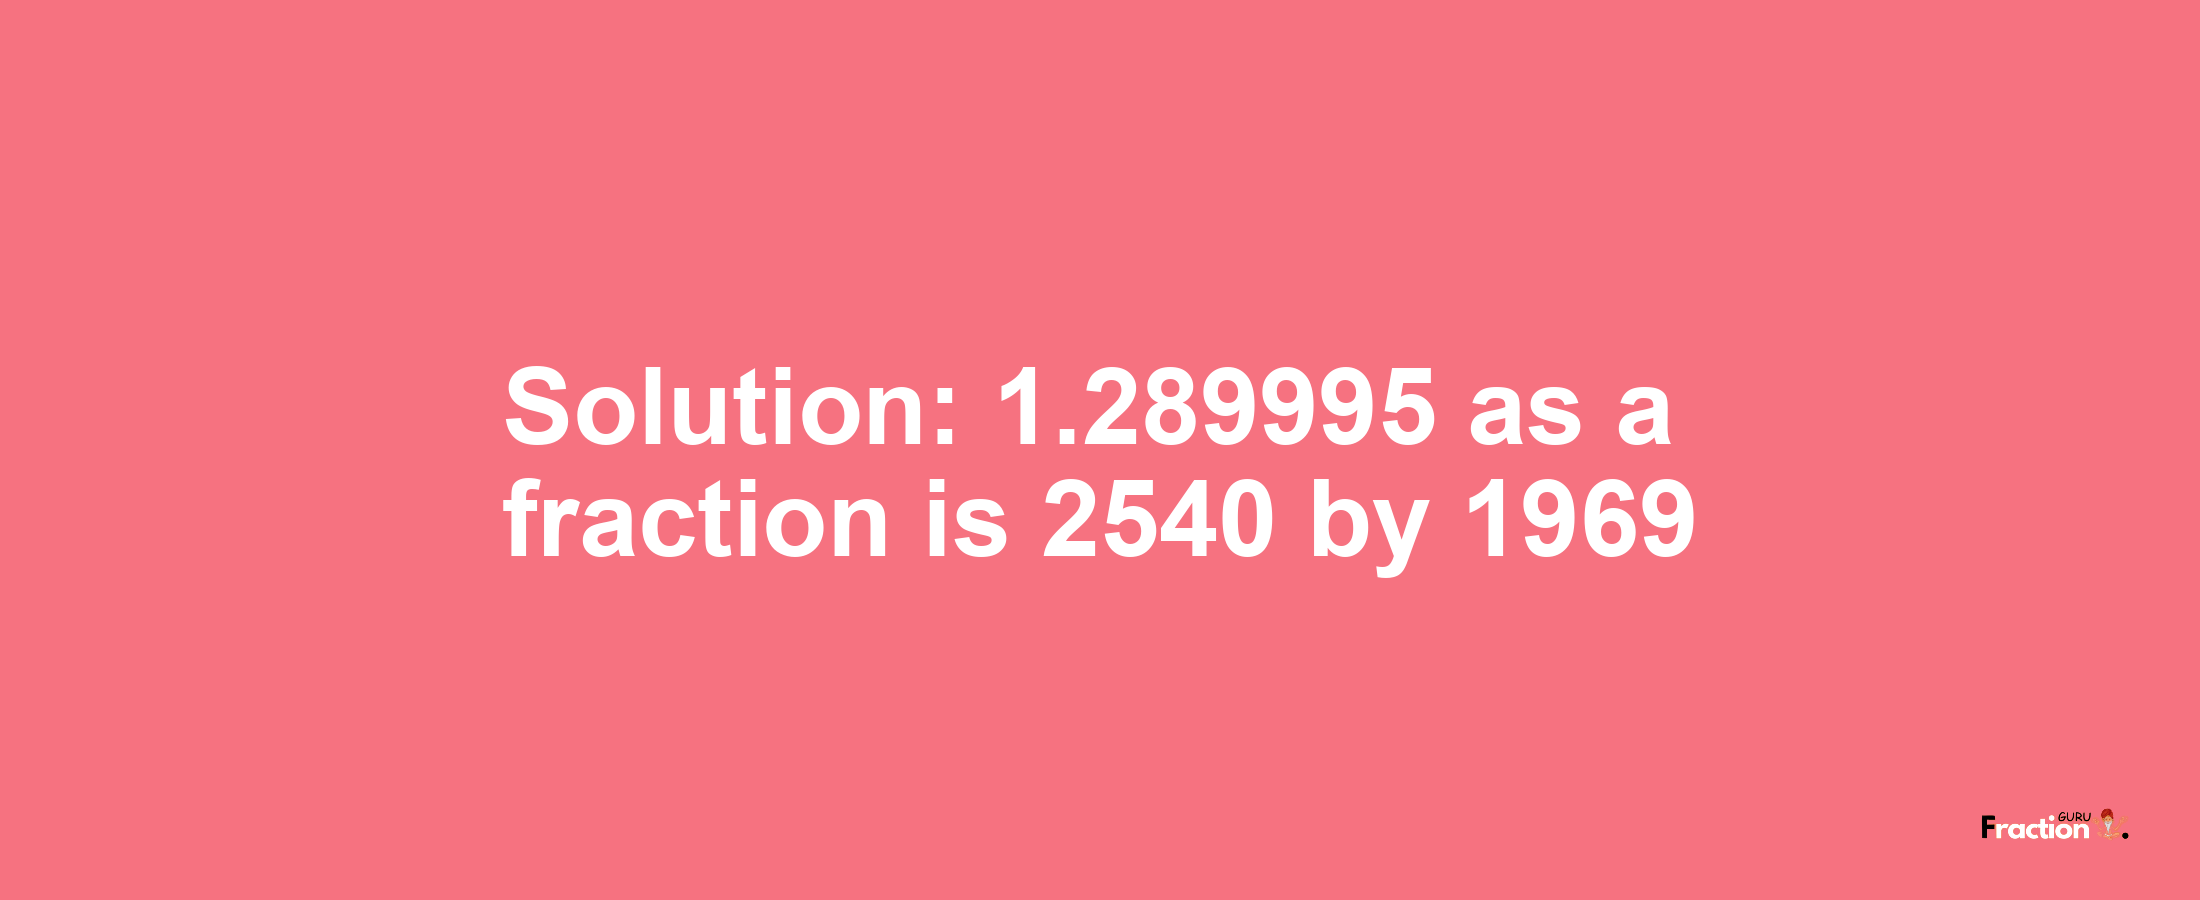 Solution:1.289995 as a fraction is 2540/1969